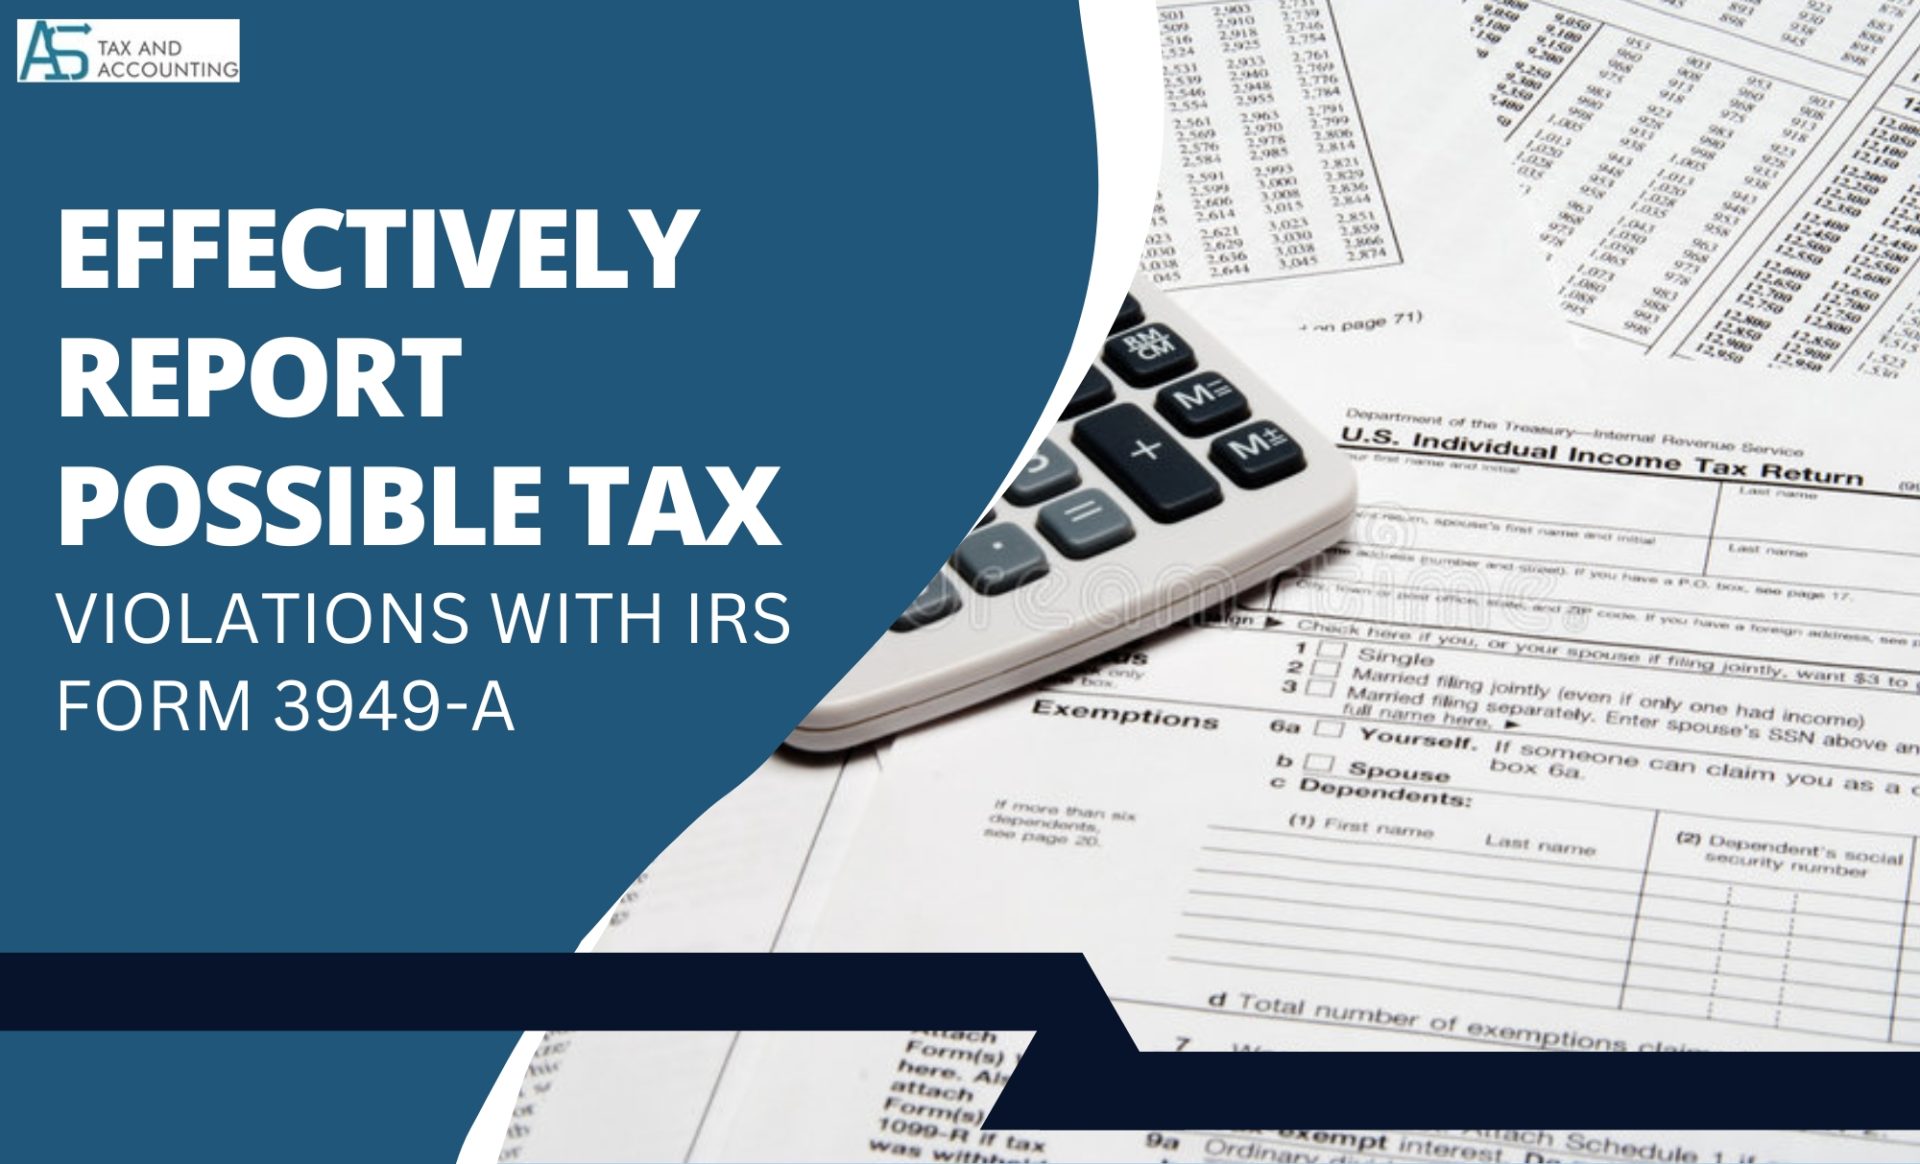 IRS Form 3949-A